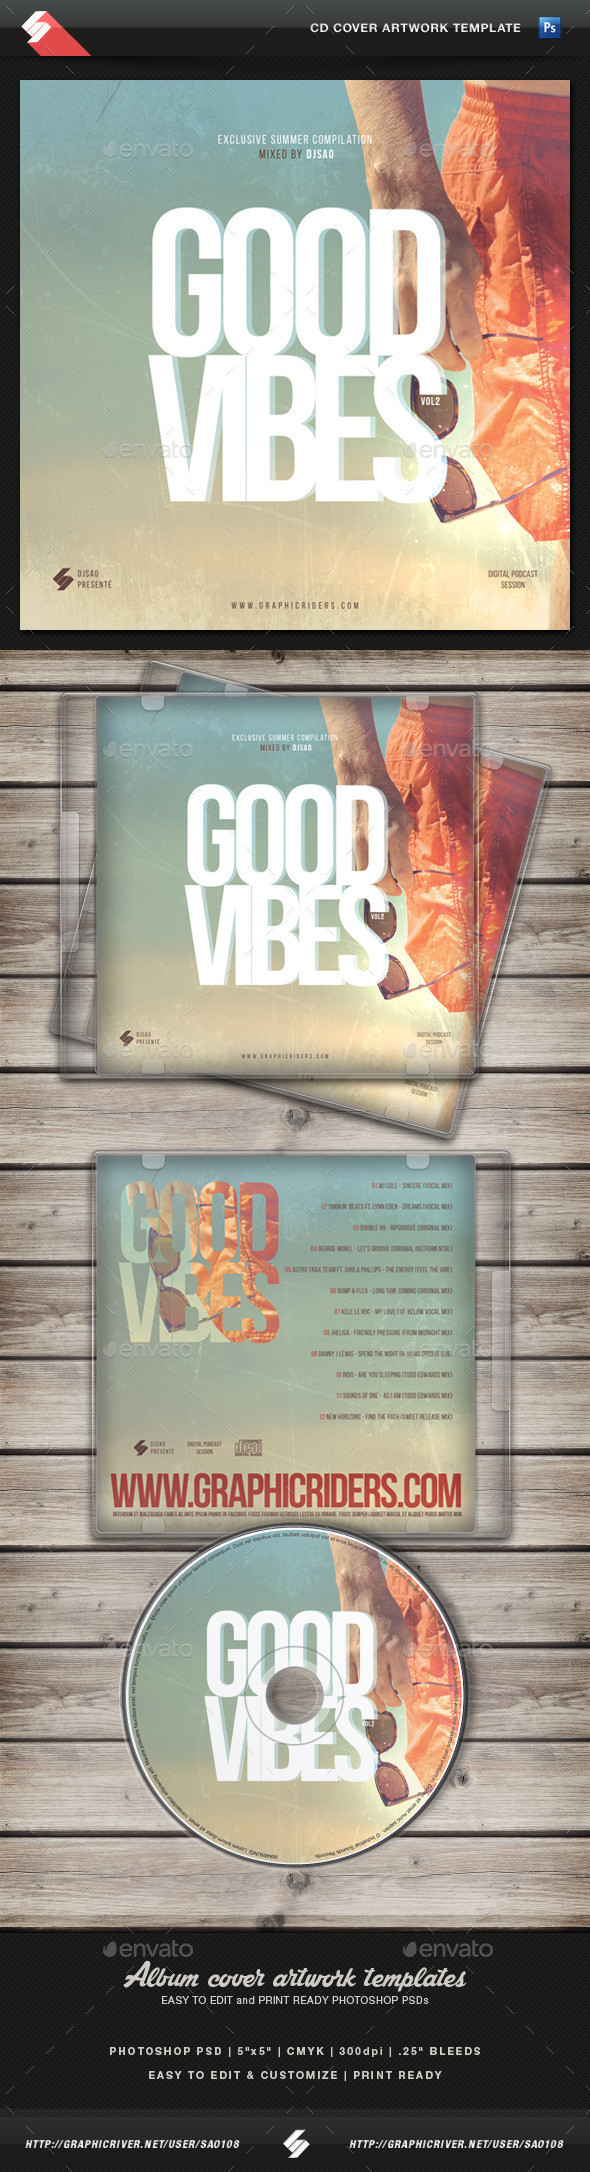 Goodvibes2 cd cover template preview